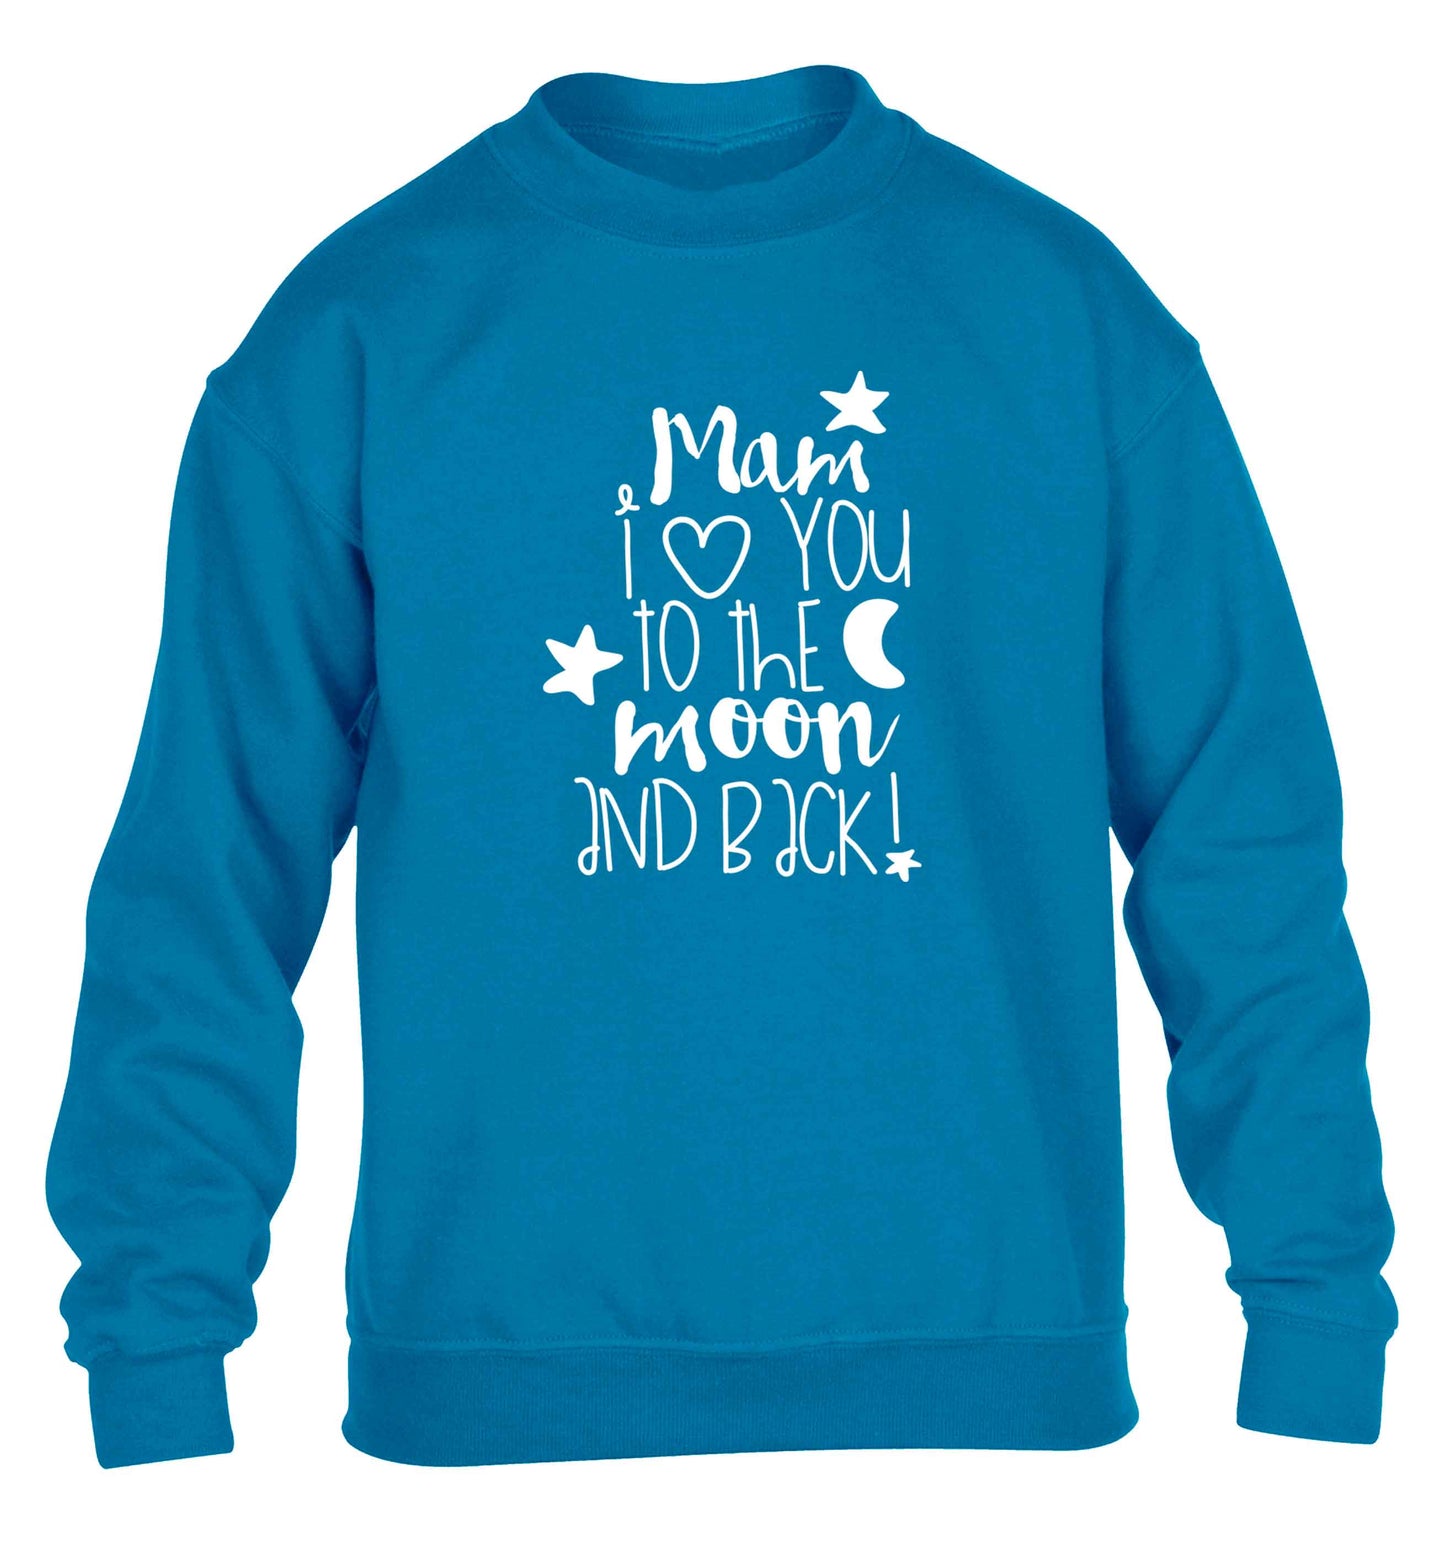 Mam I love you to the moon and back children's blue sweater 12-13 Years